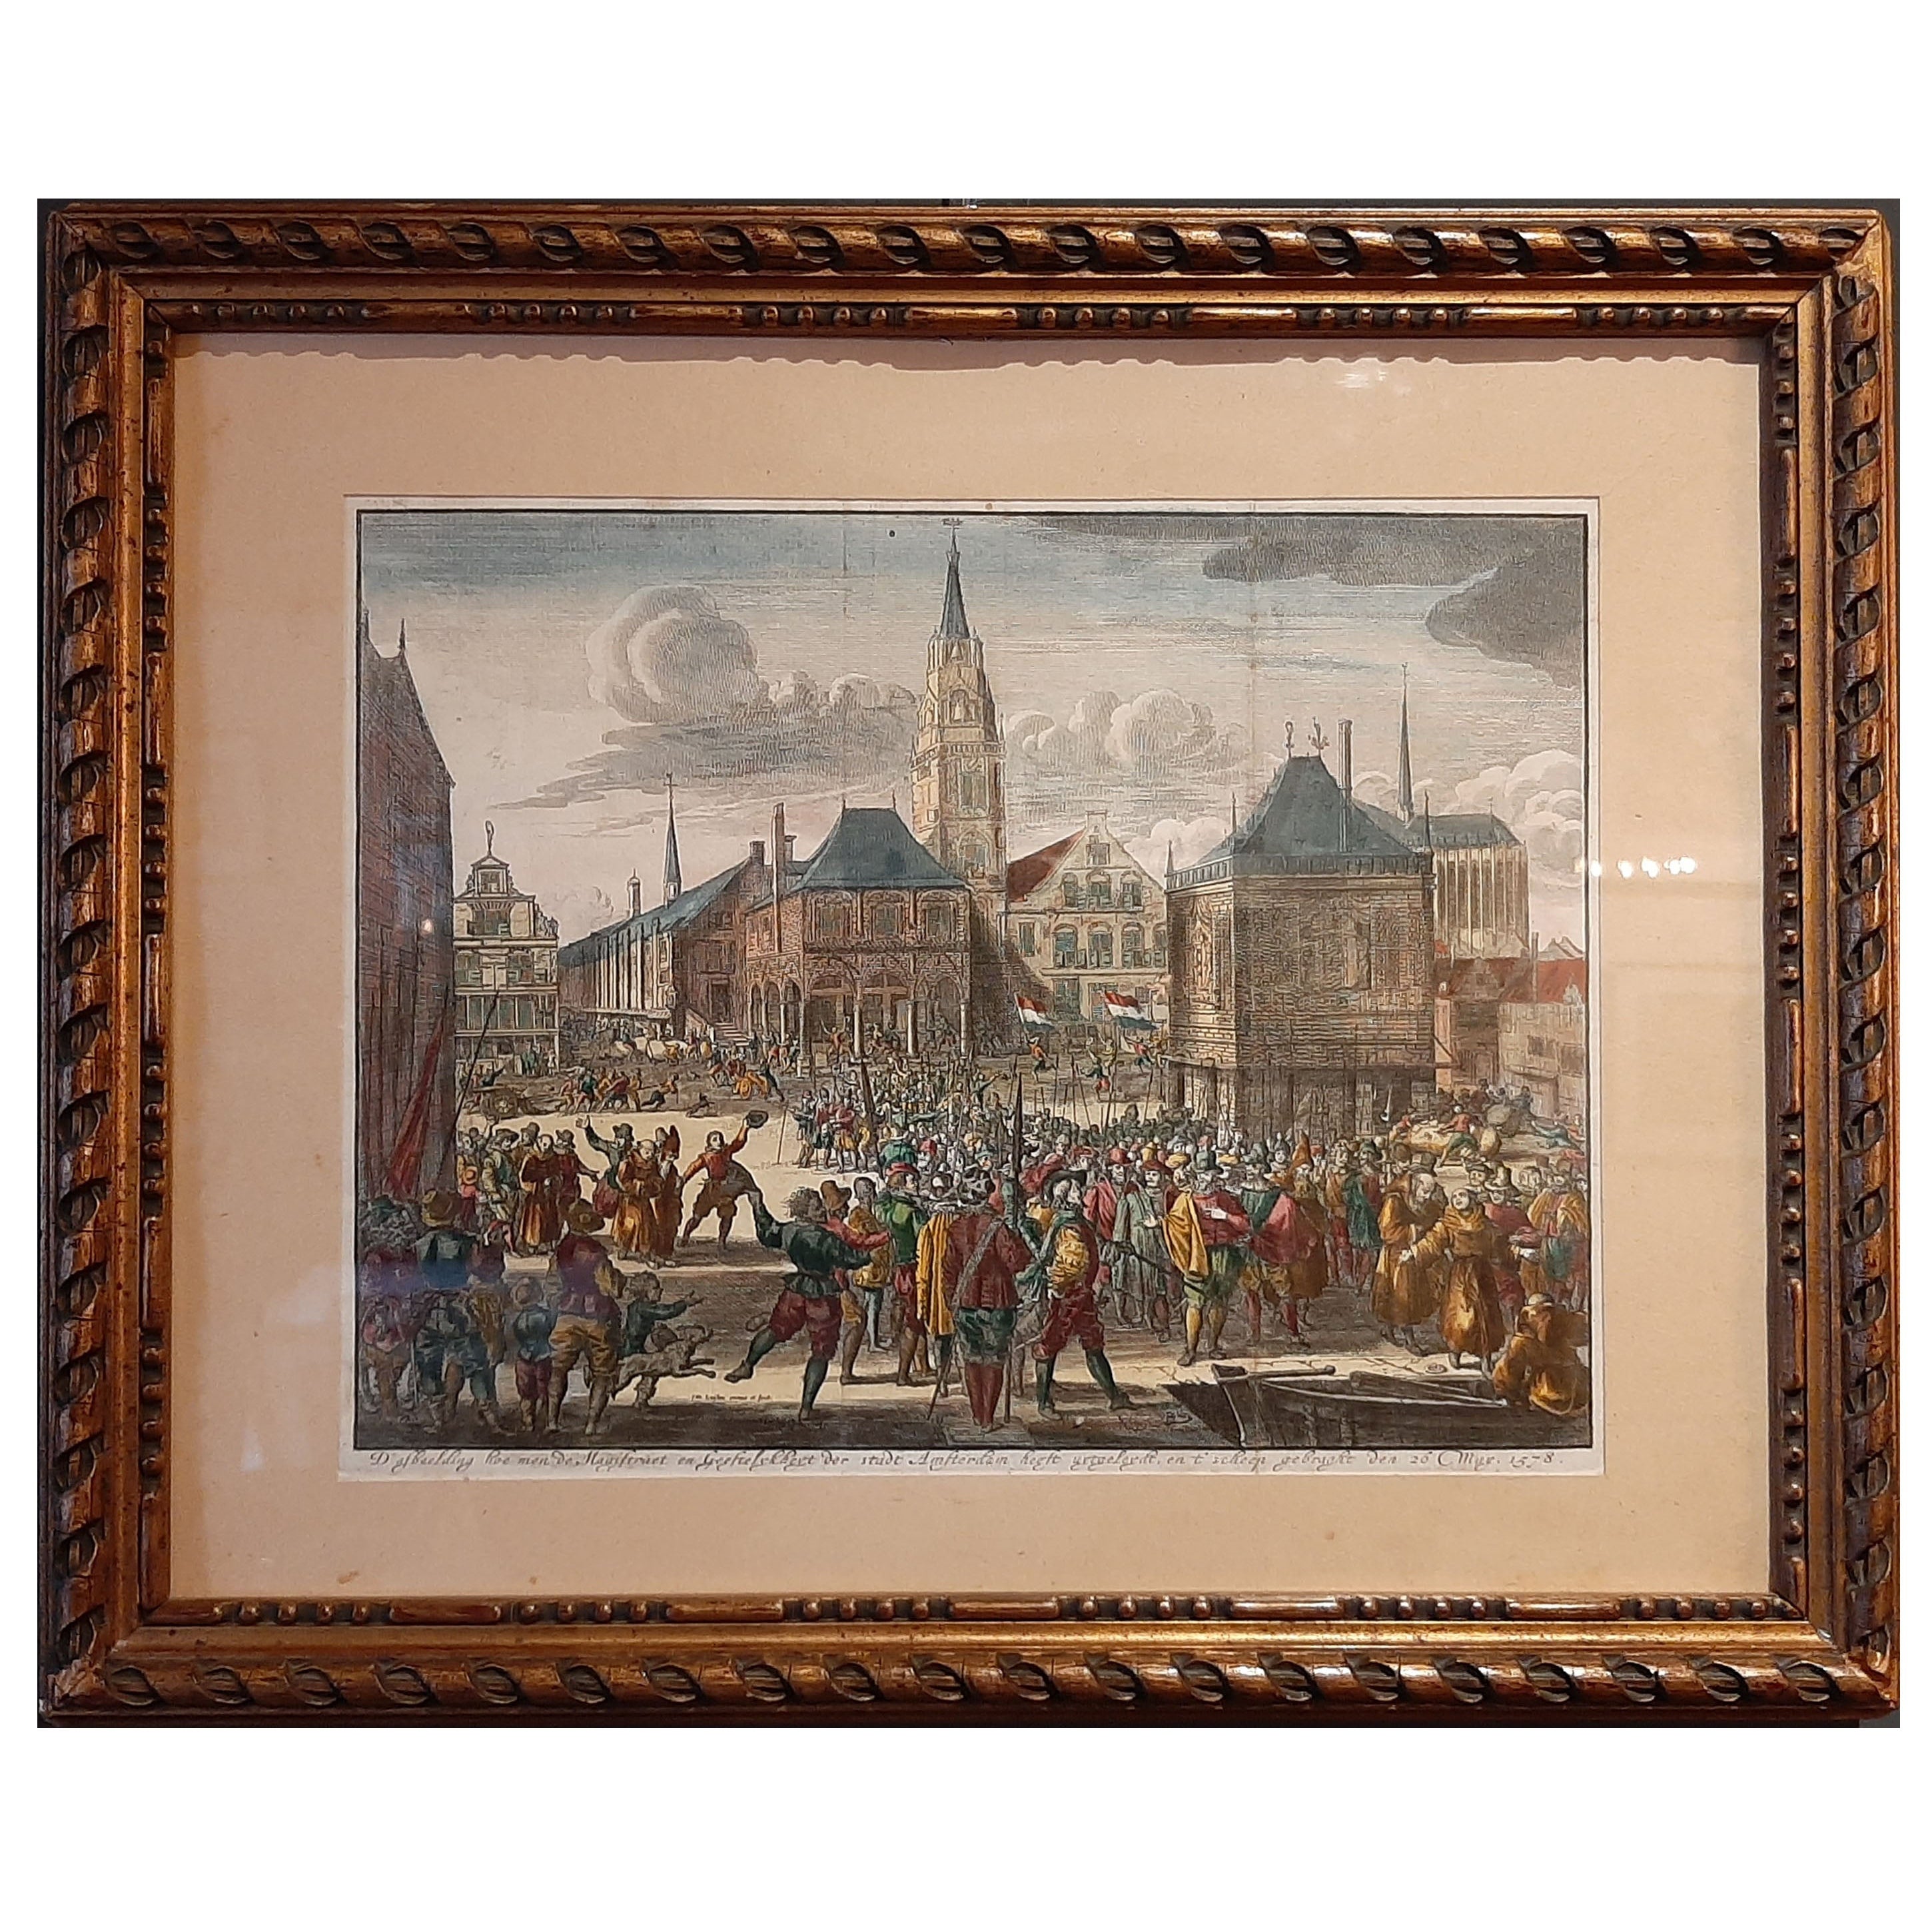 Framed Scene of the Alteration of Amsterdam, Dam square, The Netherlands, c.1720